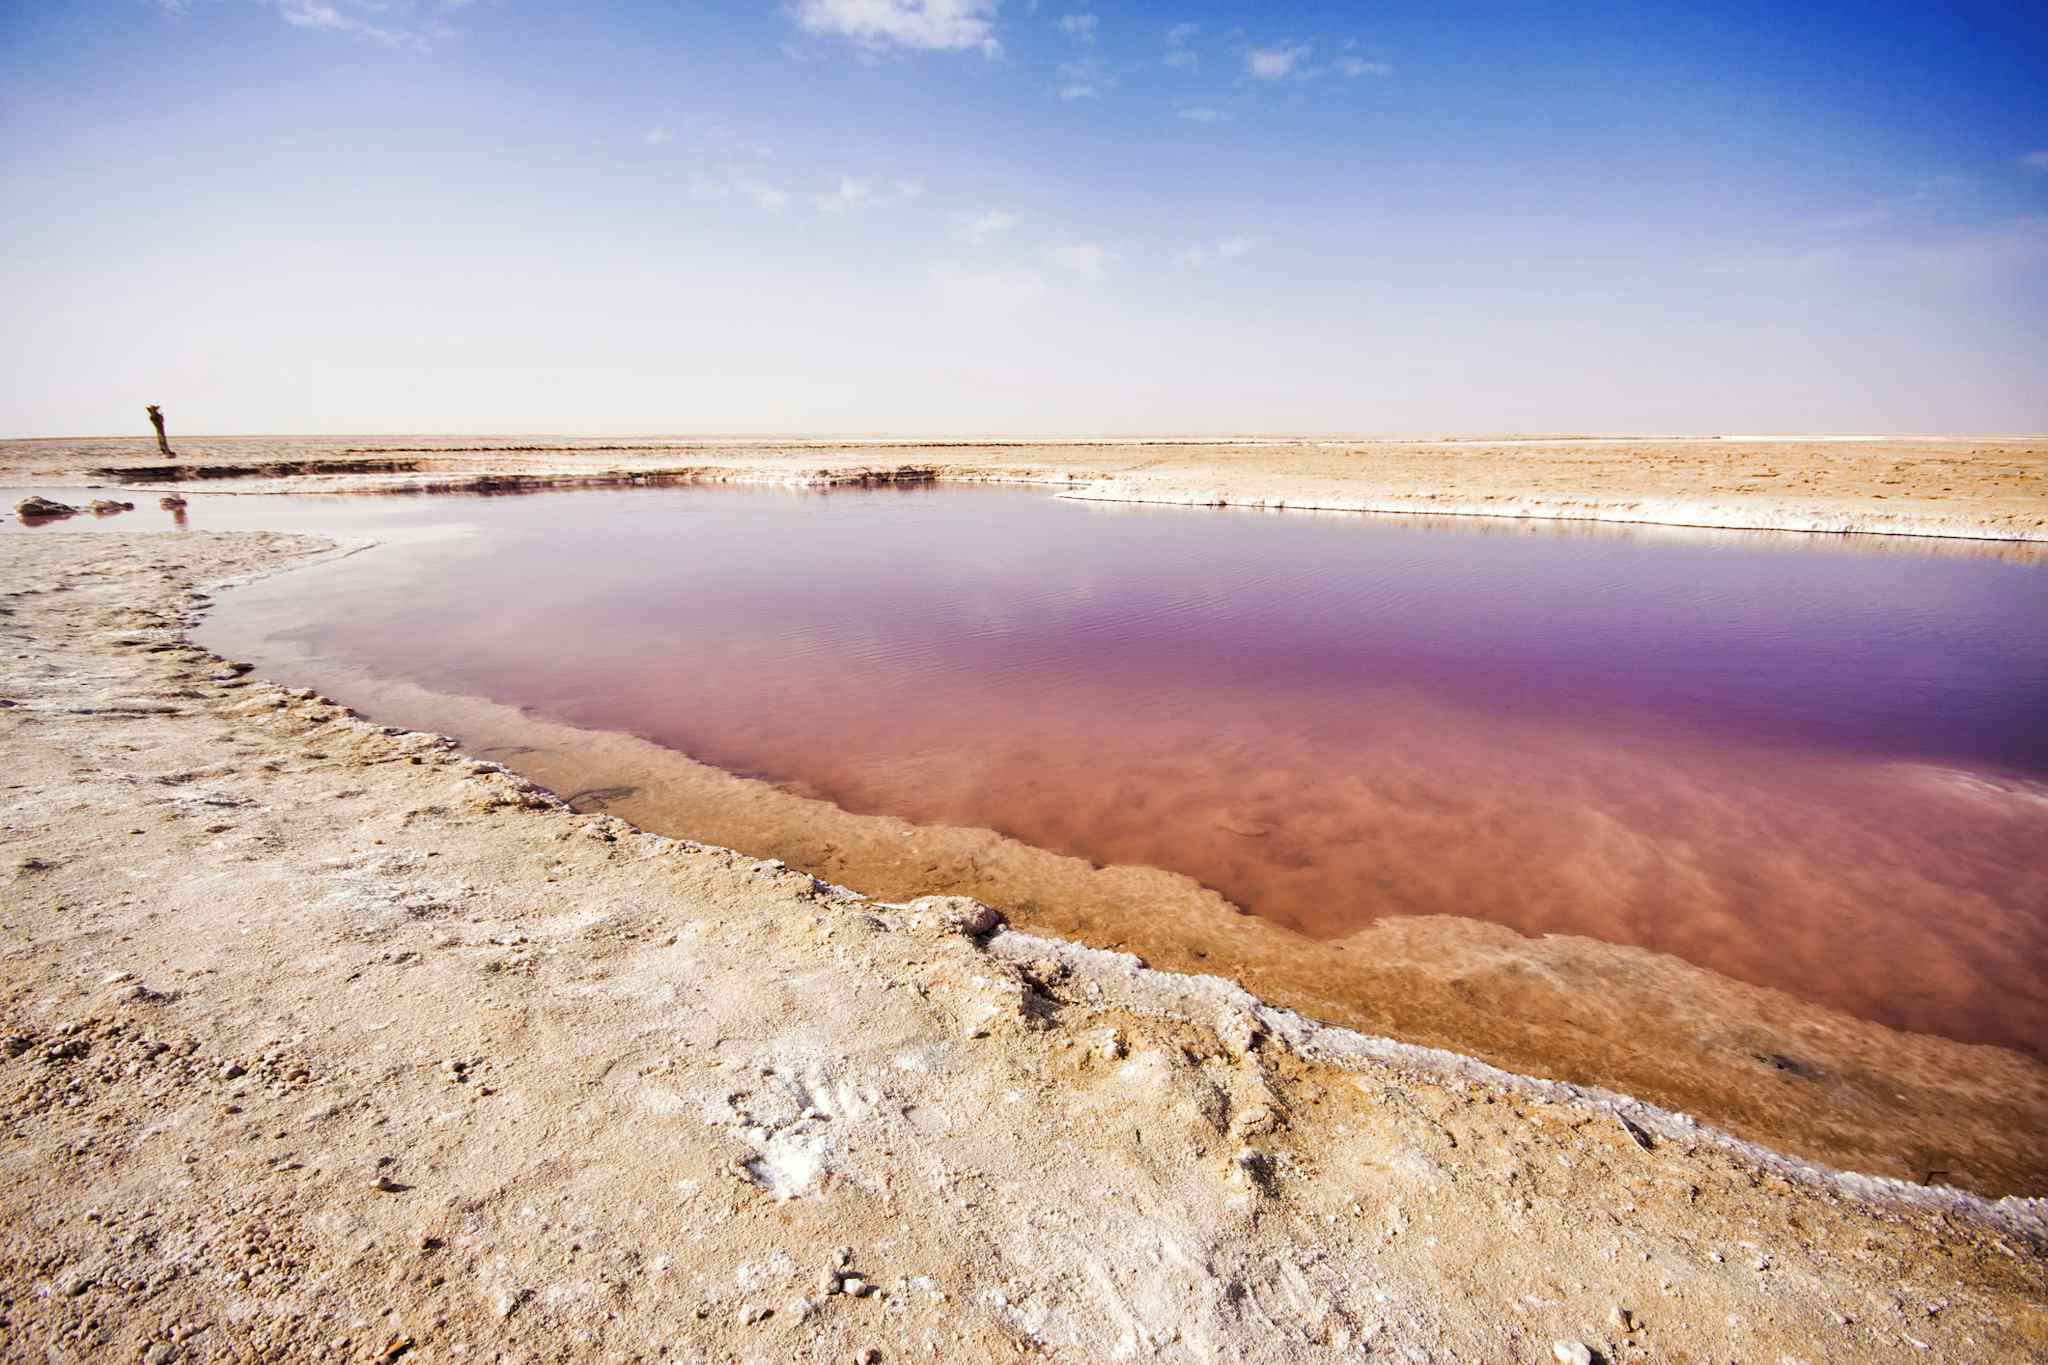 Chott el Djerid, a salt lake in Tunisia with pink and purple waters.